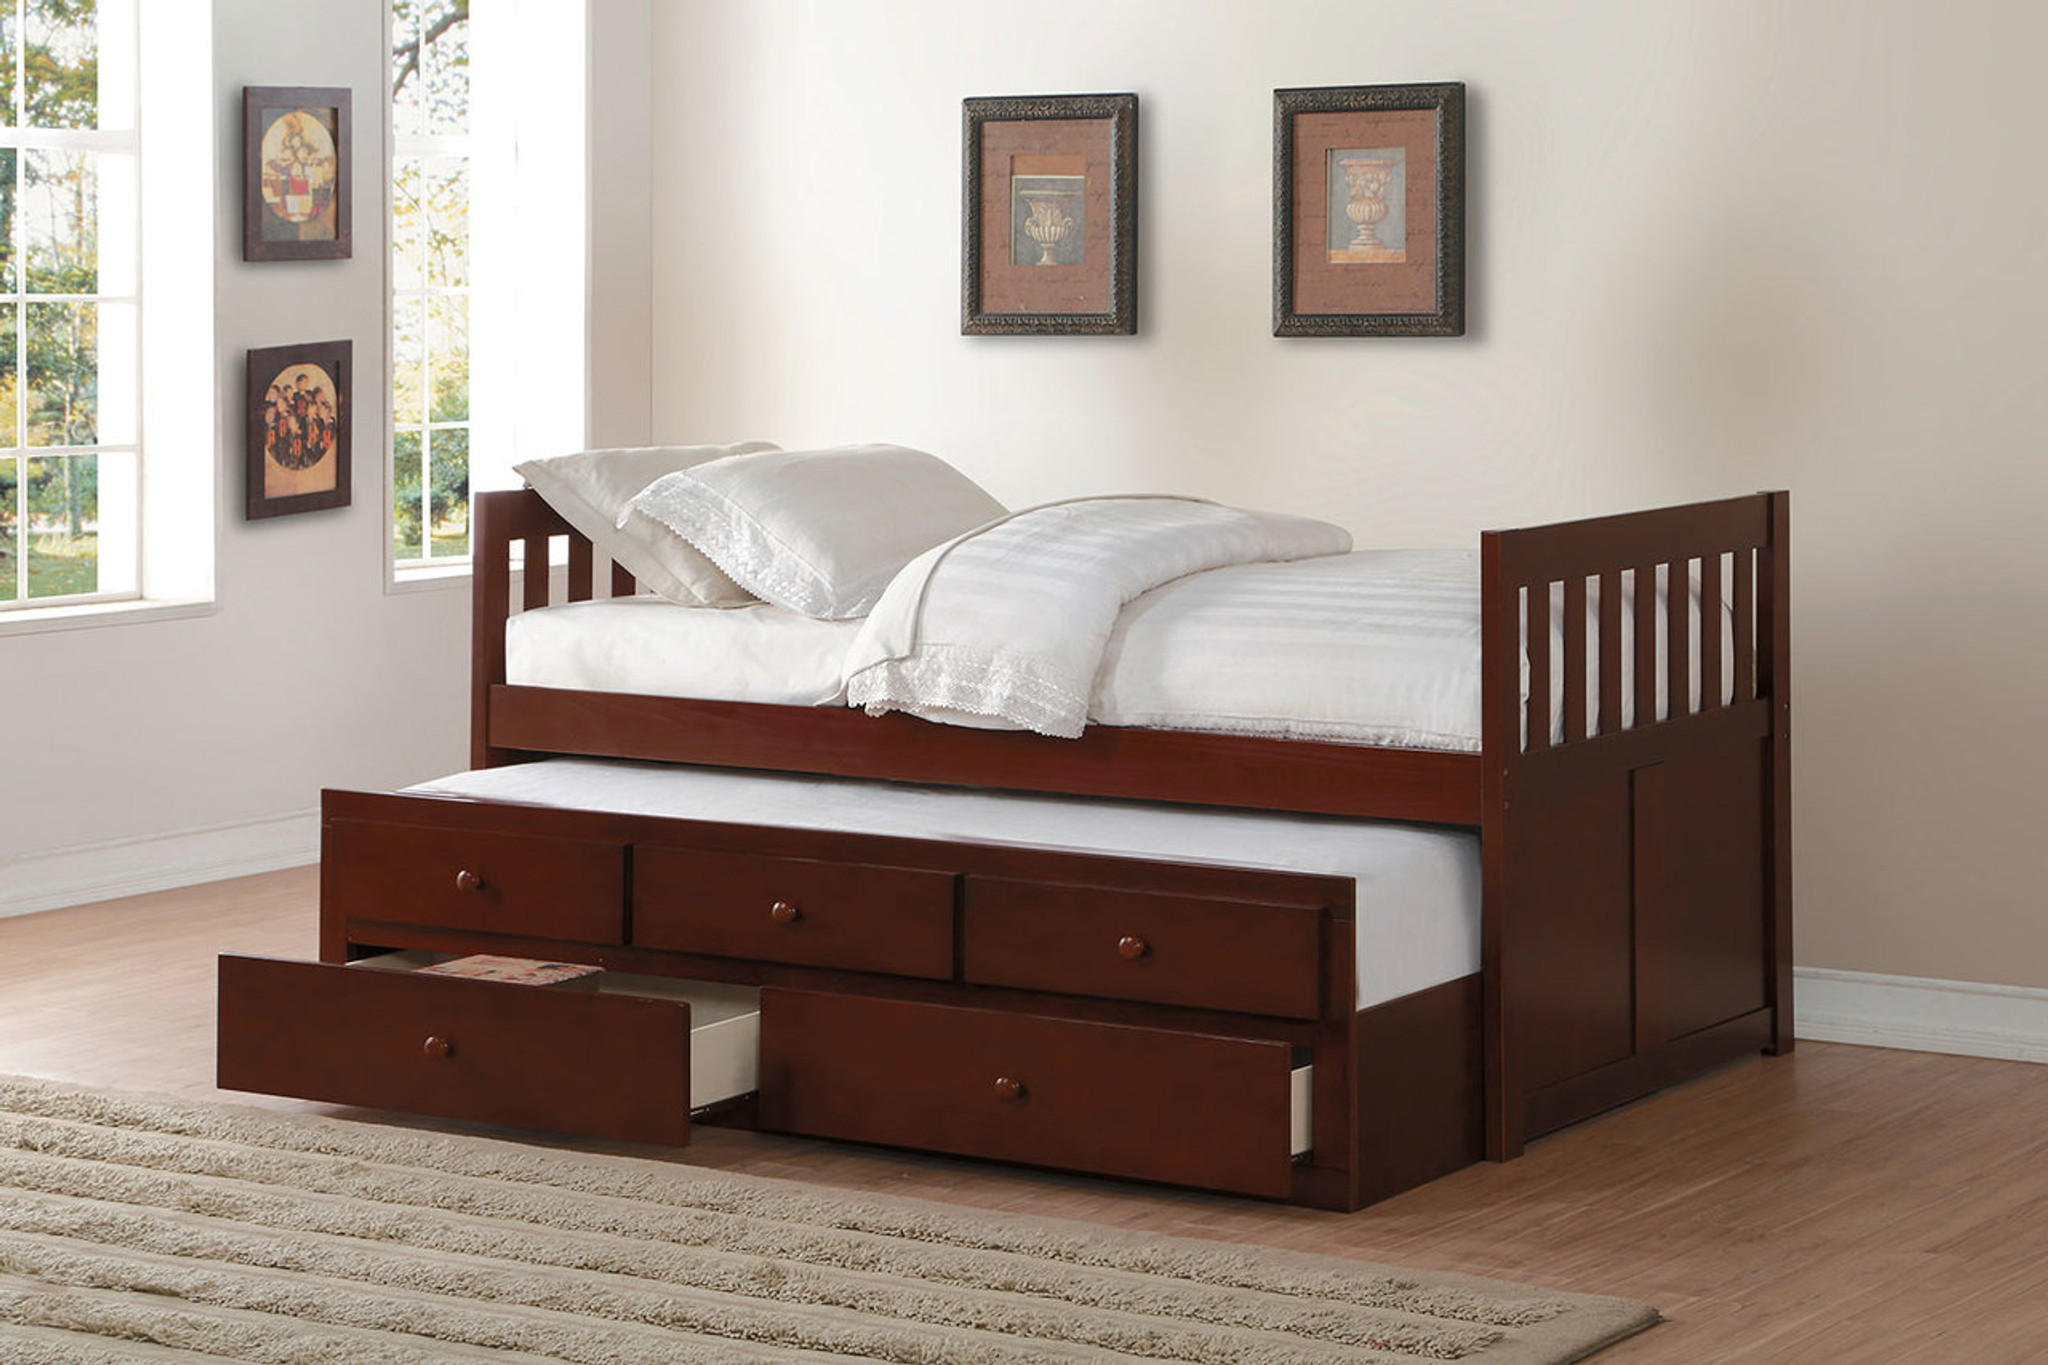 B2013PRDC ROWE TWIN BED WITH TRUNDLE AND STORAGE DRAWERS 